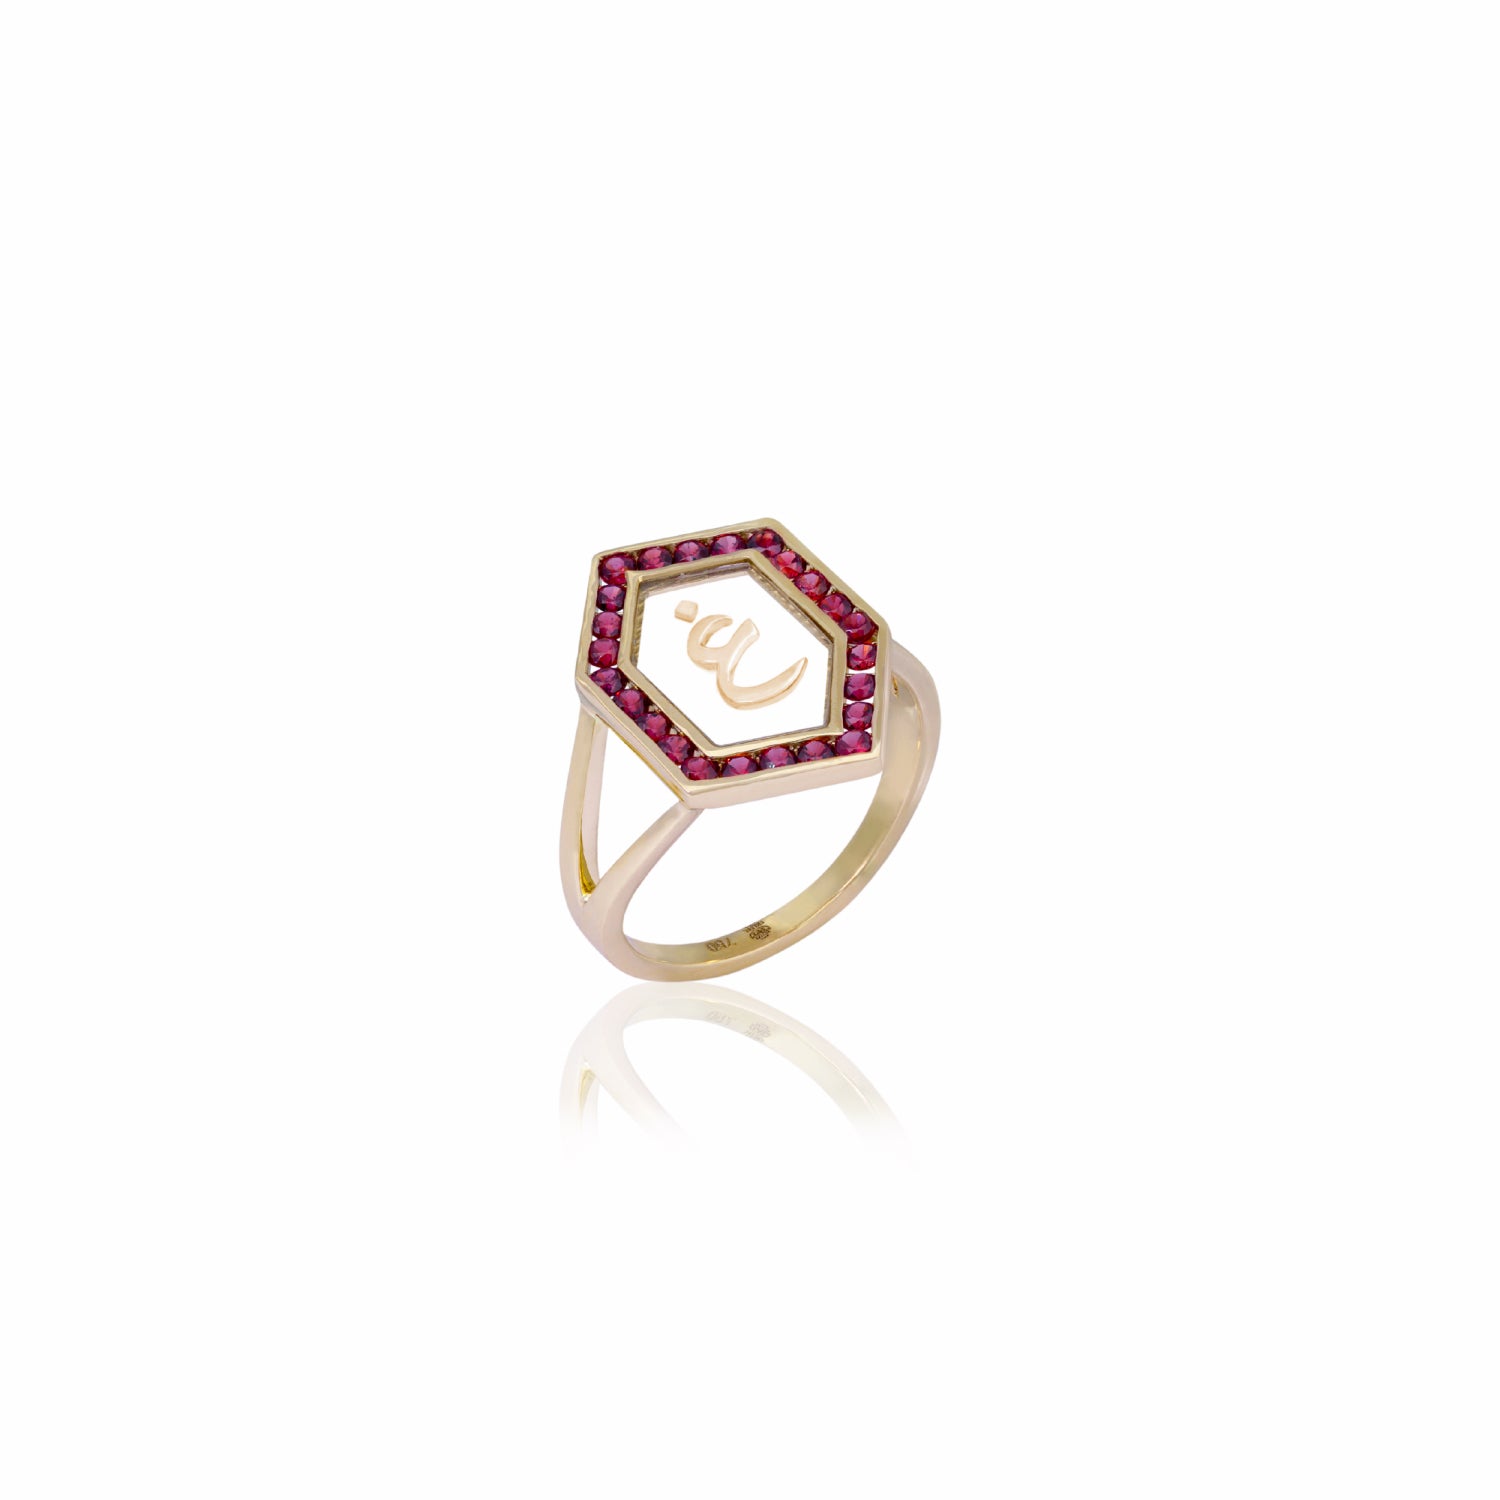 Qamoos 1.0 Letter غ Ruby Ring in Yellow Gold